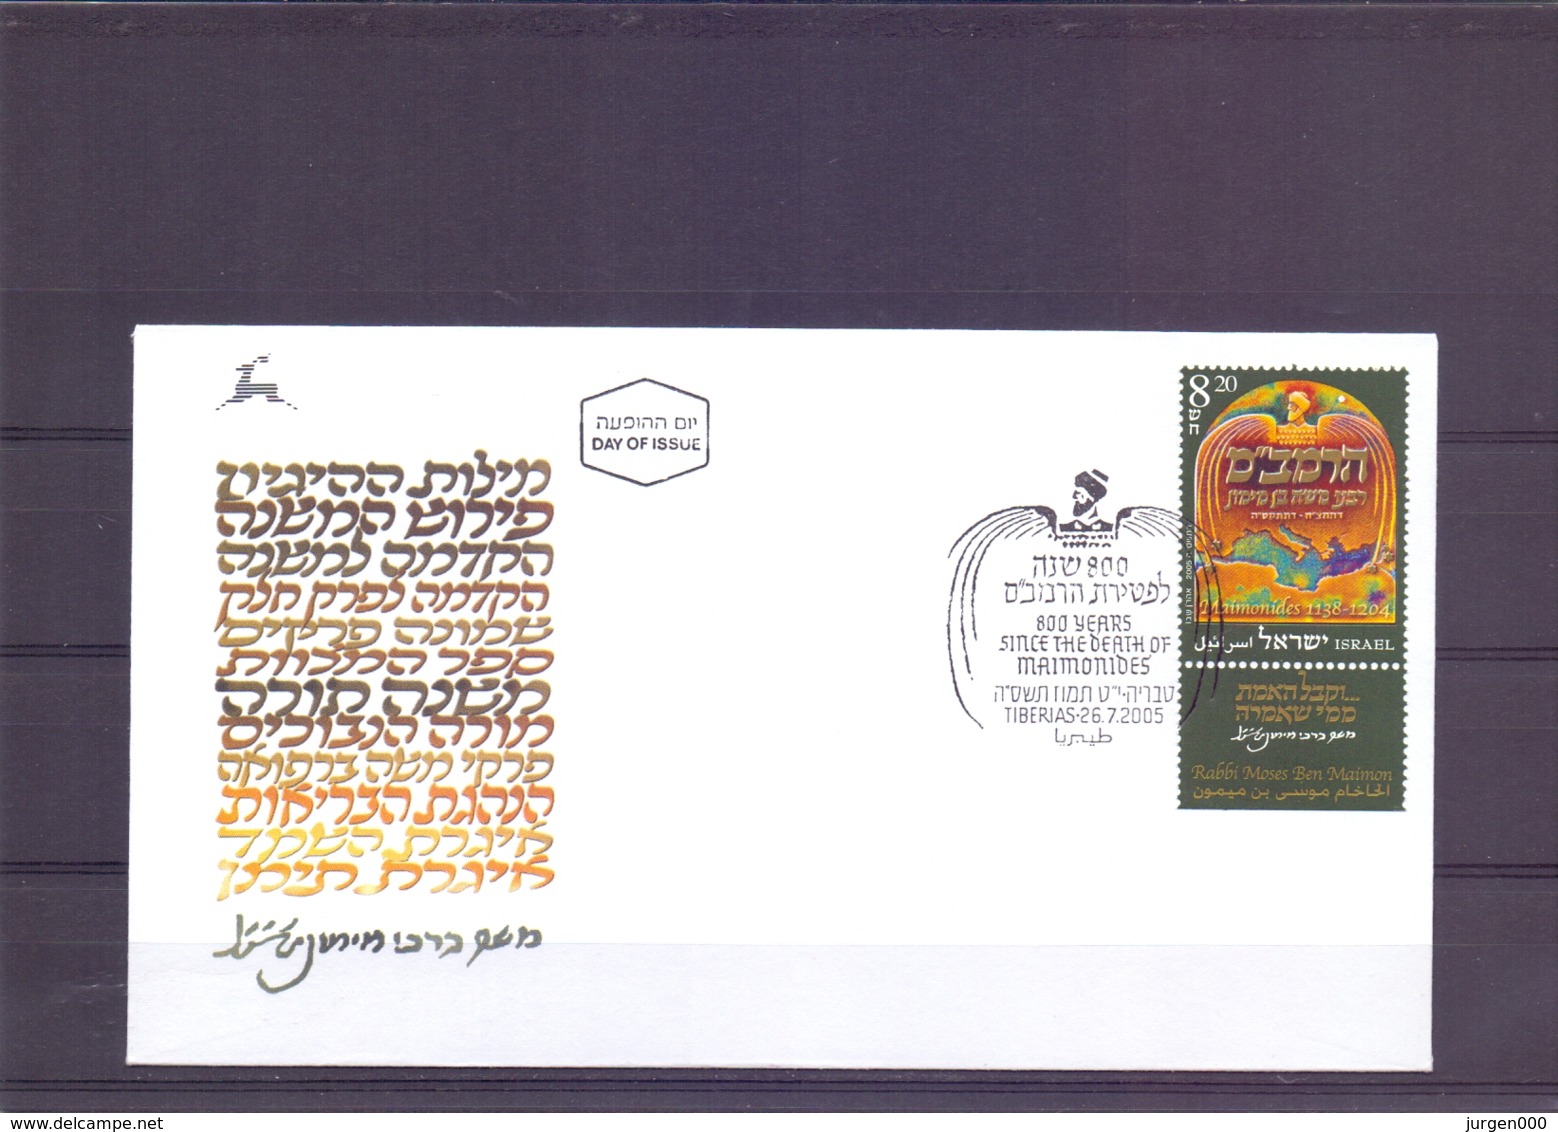 Israel - FDC - 800 Years Deuth Maimonides - Michel 1829 - Tiberias 26/7/2005  (RM14817) - Covers & Documents